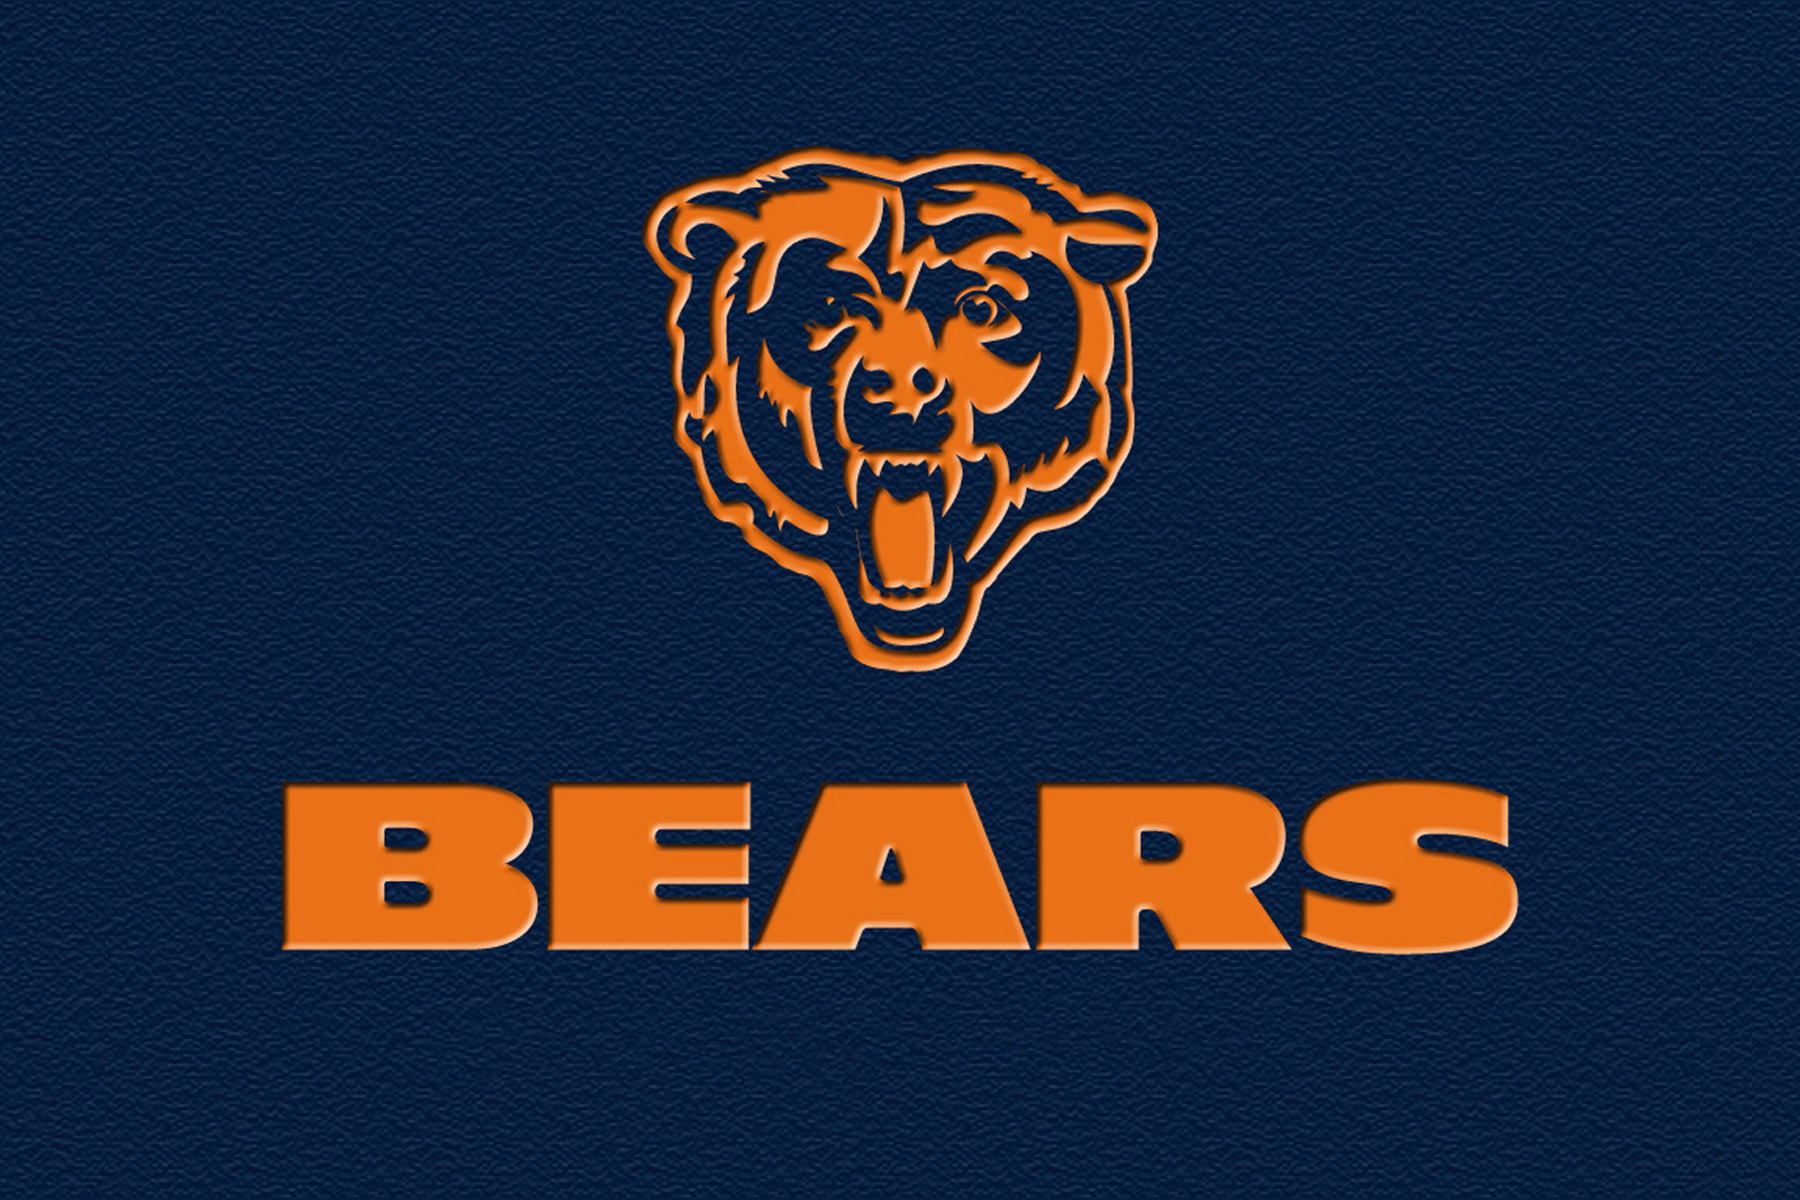 Chicago Bears wallpaper HD background Chicago Bears wallpapers 1800x1200